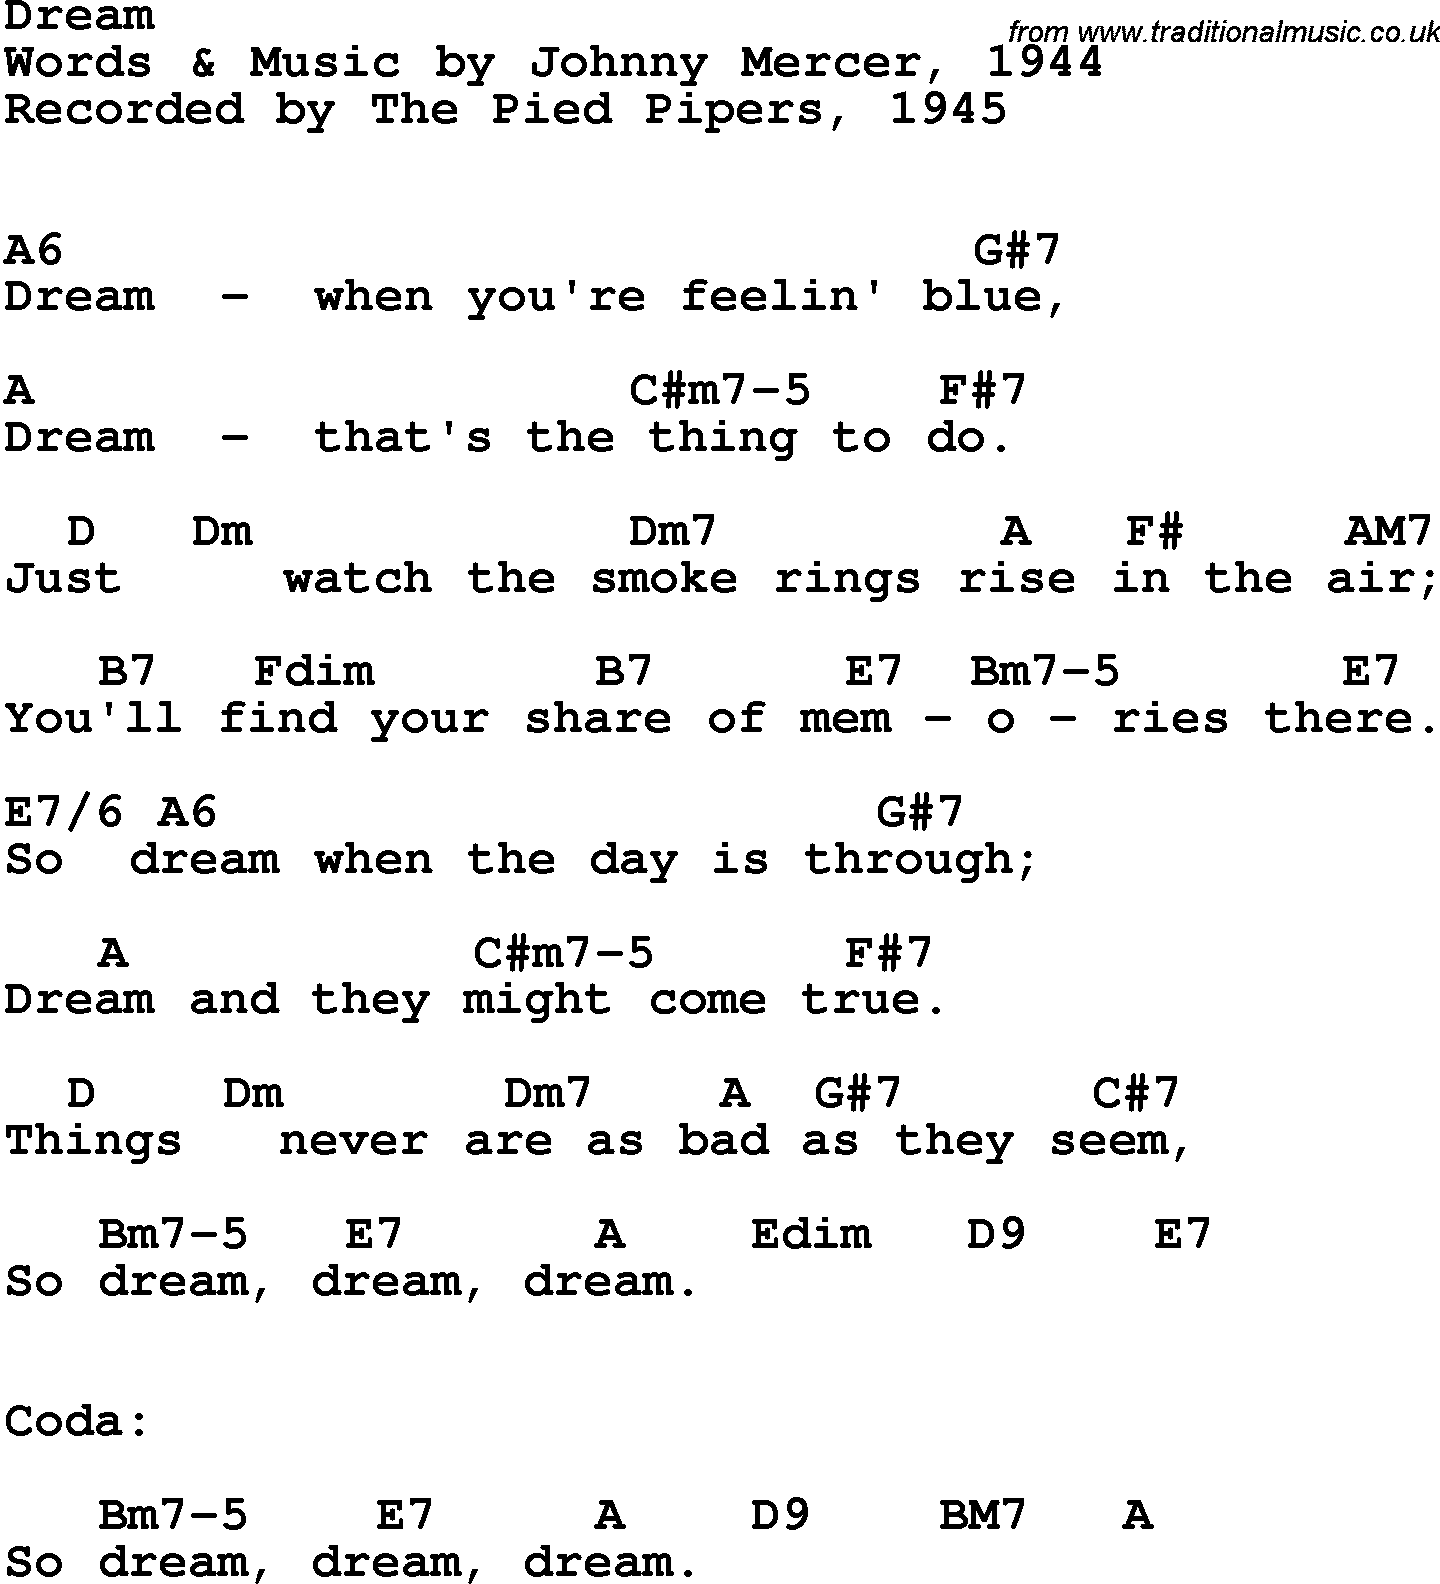 Song Lyrics with guitar chords for Dream - The Pied Pipers, 1945